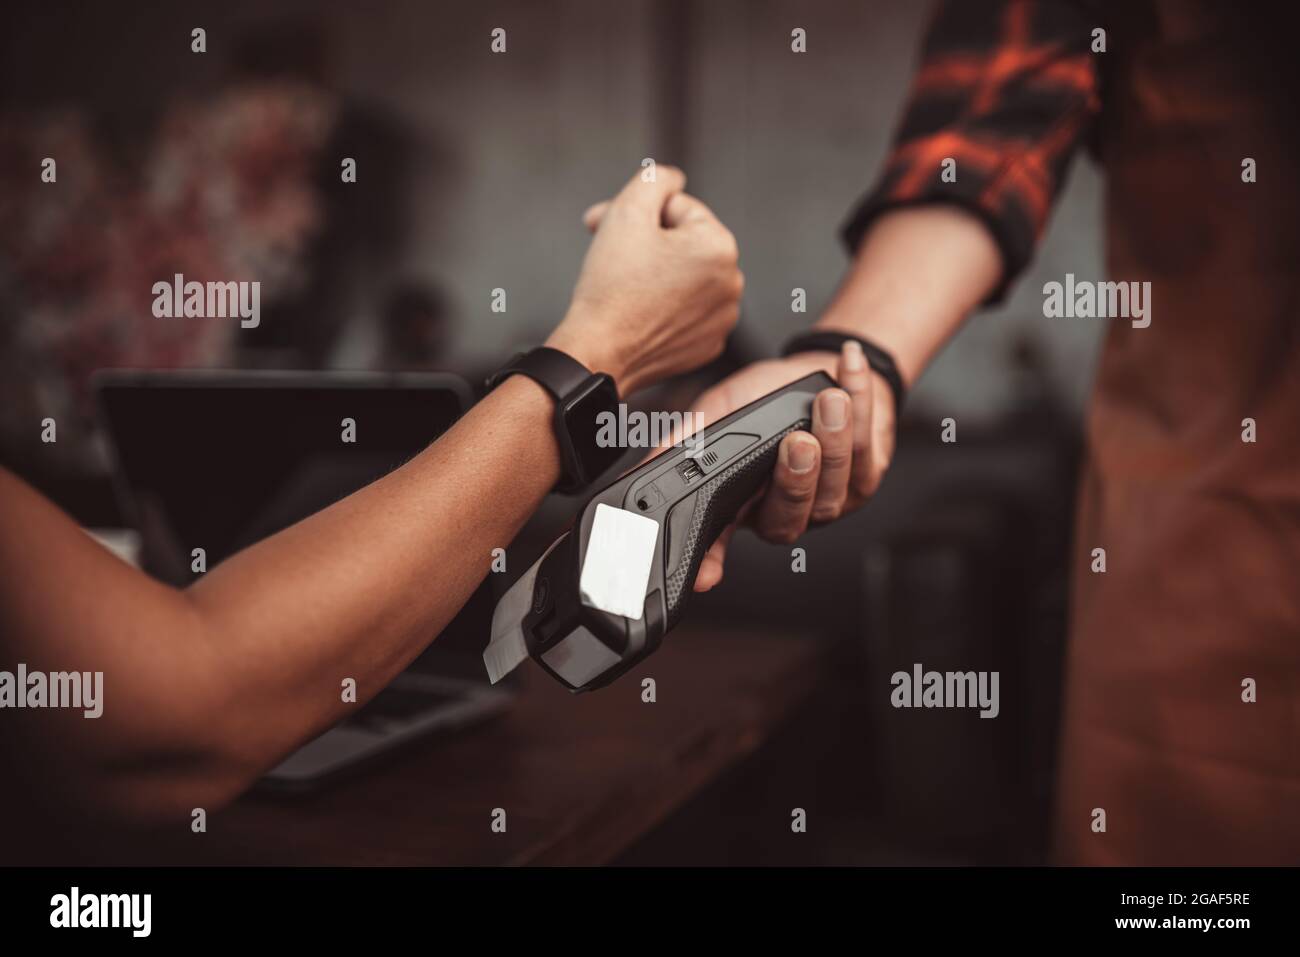 Smartwatch payment with credit card reader machine at cafe Stock Photo